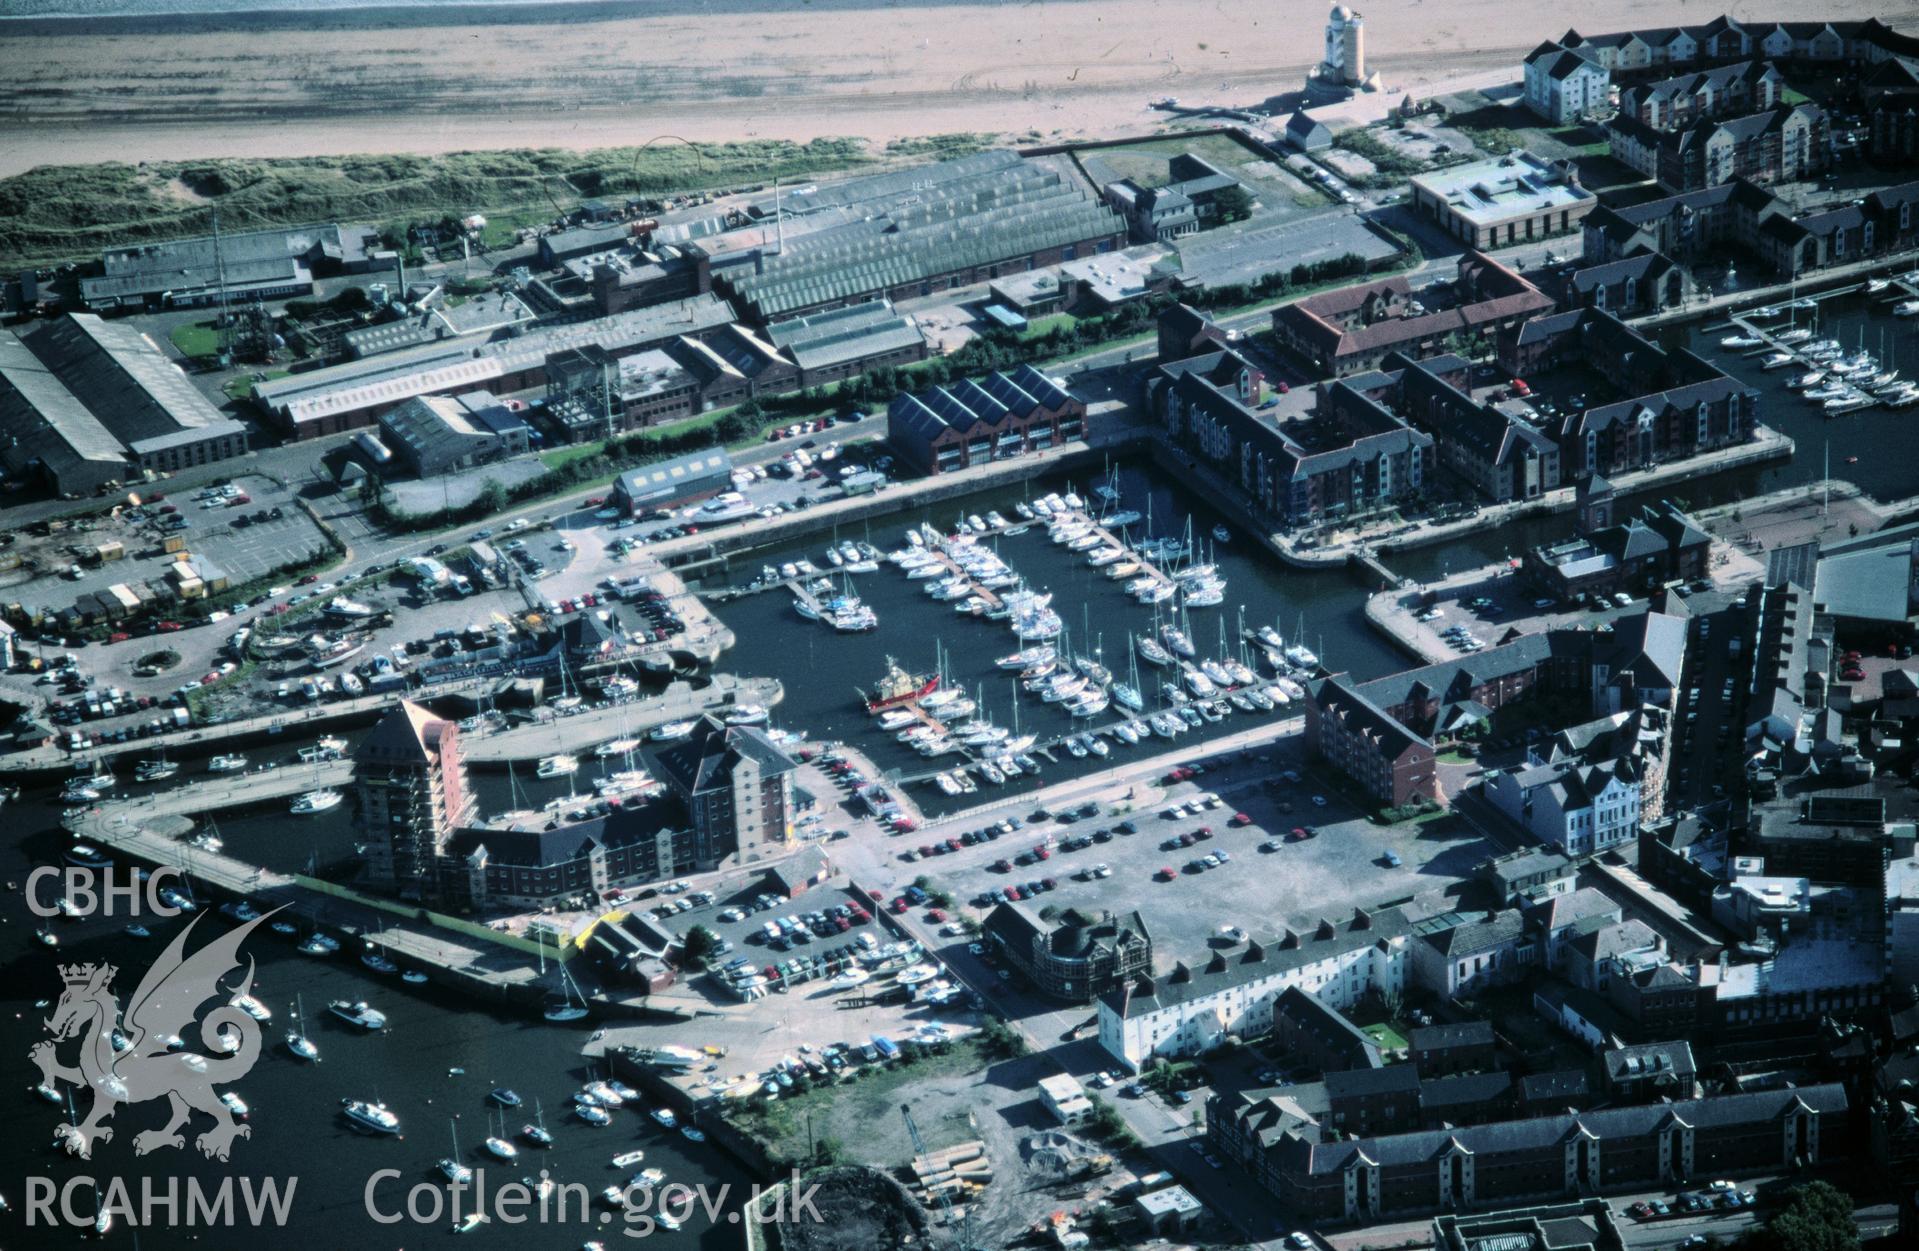 Slide of RCAHMW colour oblique aerial photograph of Swansea Marina, taken by C.R. Musson, 25/8/1991.